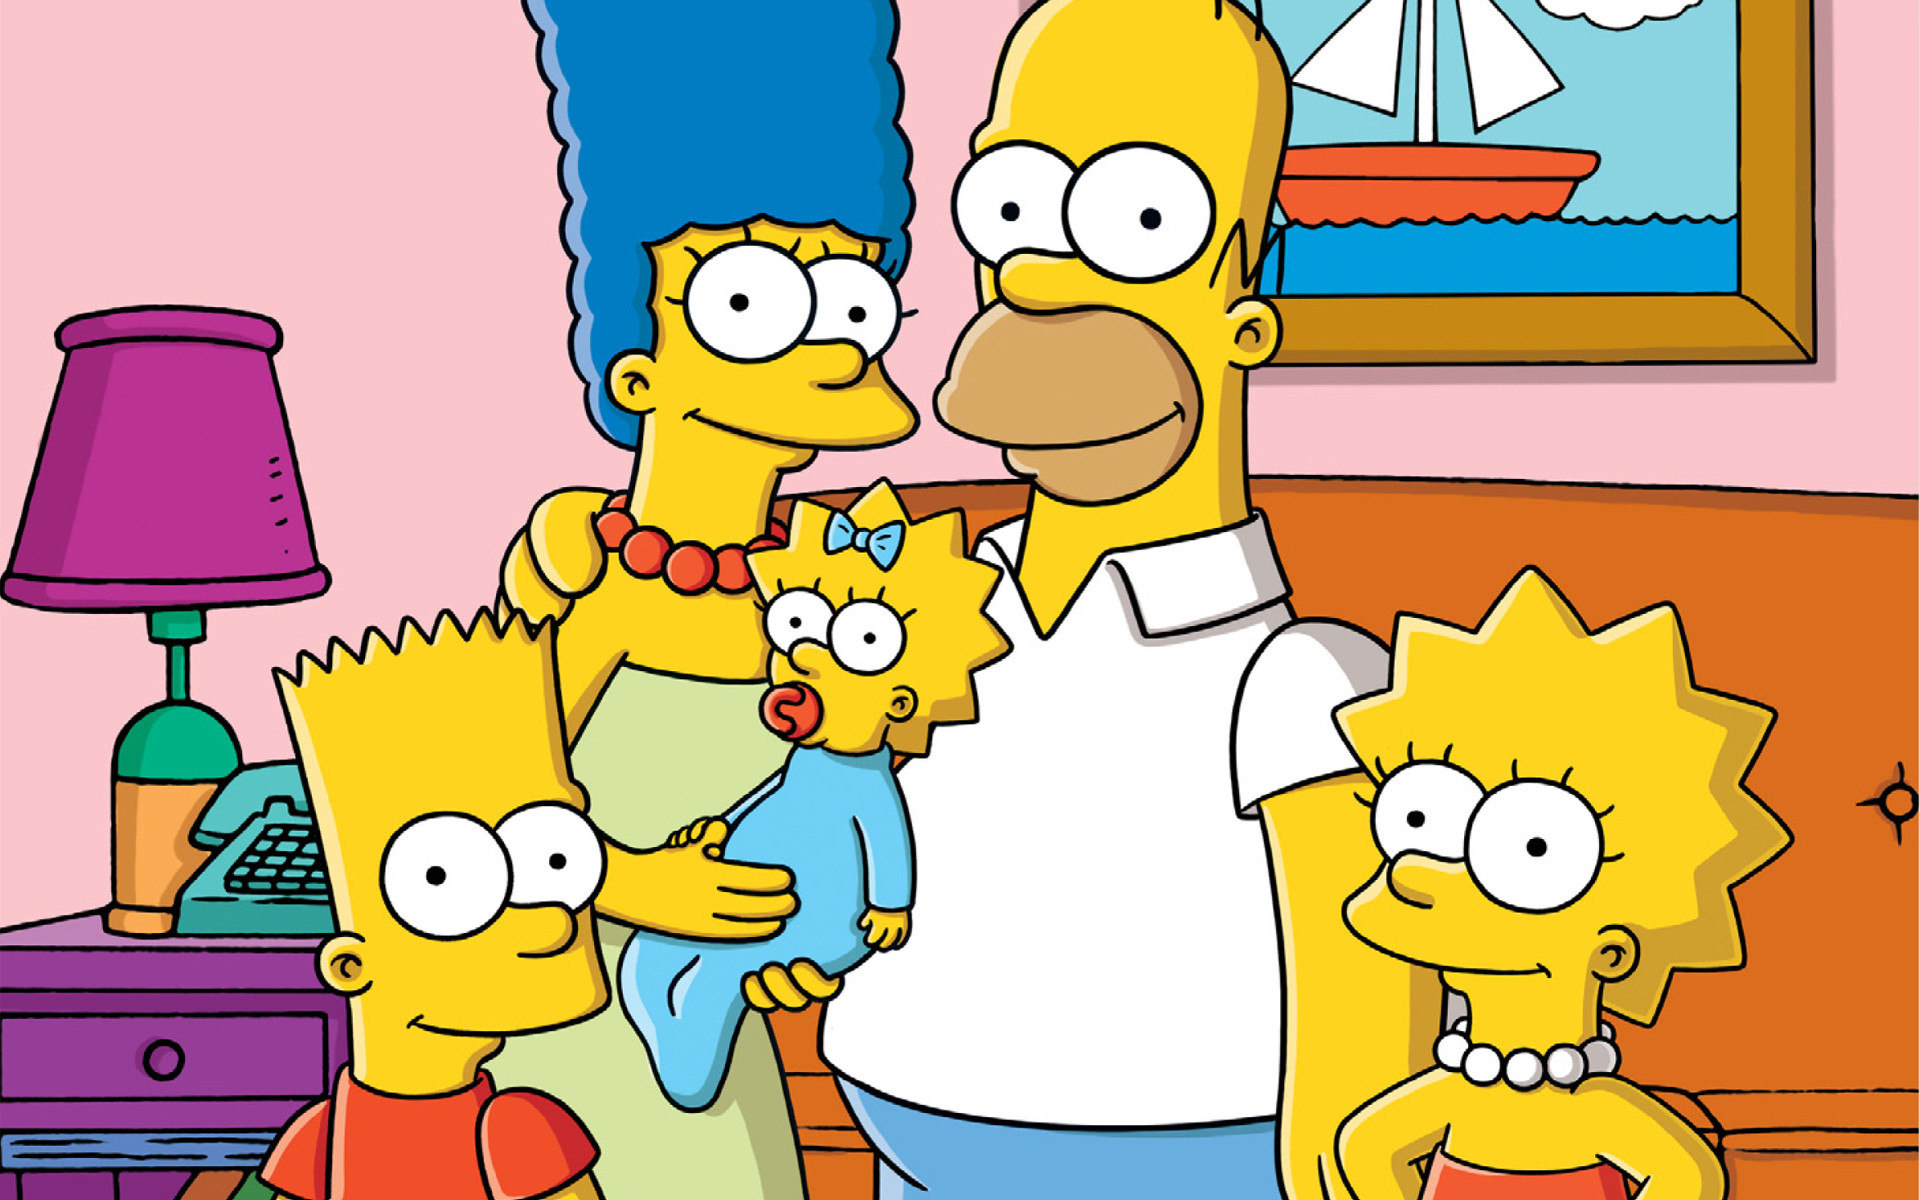 tv show, the simpsons, bart simpson, homer simpson, lisa simpson, maggie simpson, marge simpson